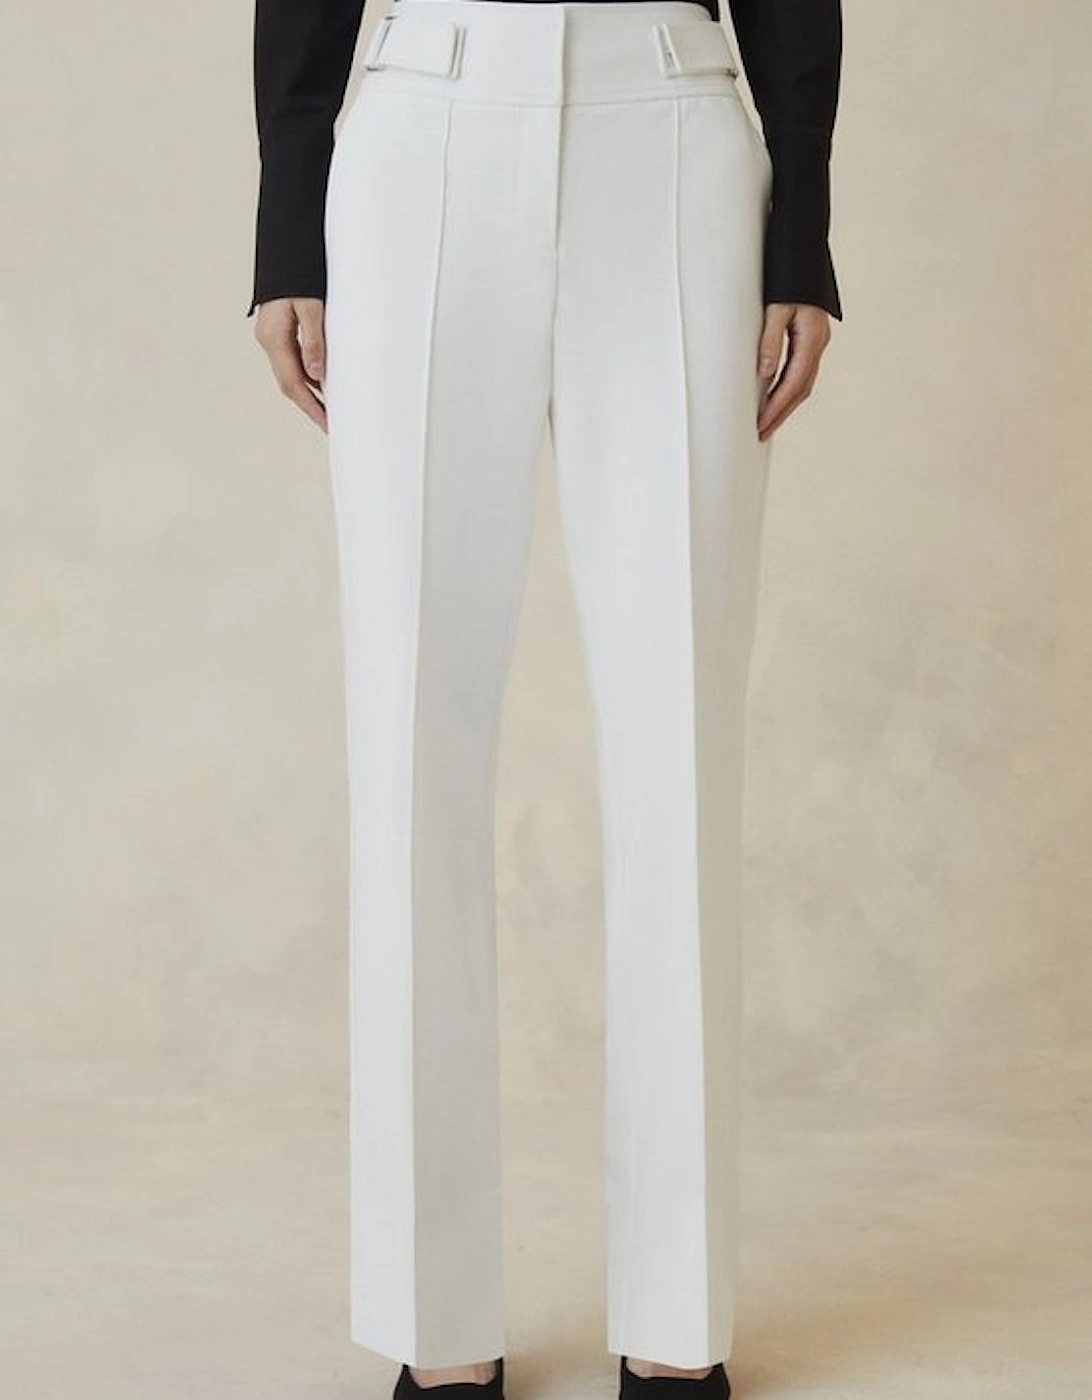 Petite The Founder Compact Stretch Slim Leg Trouser